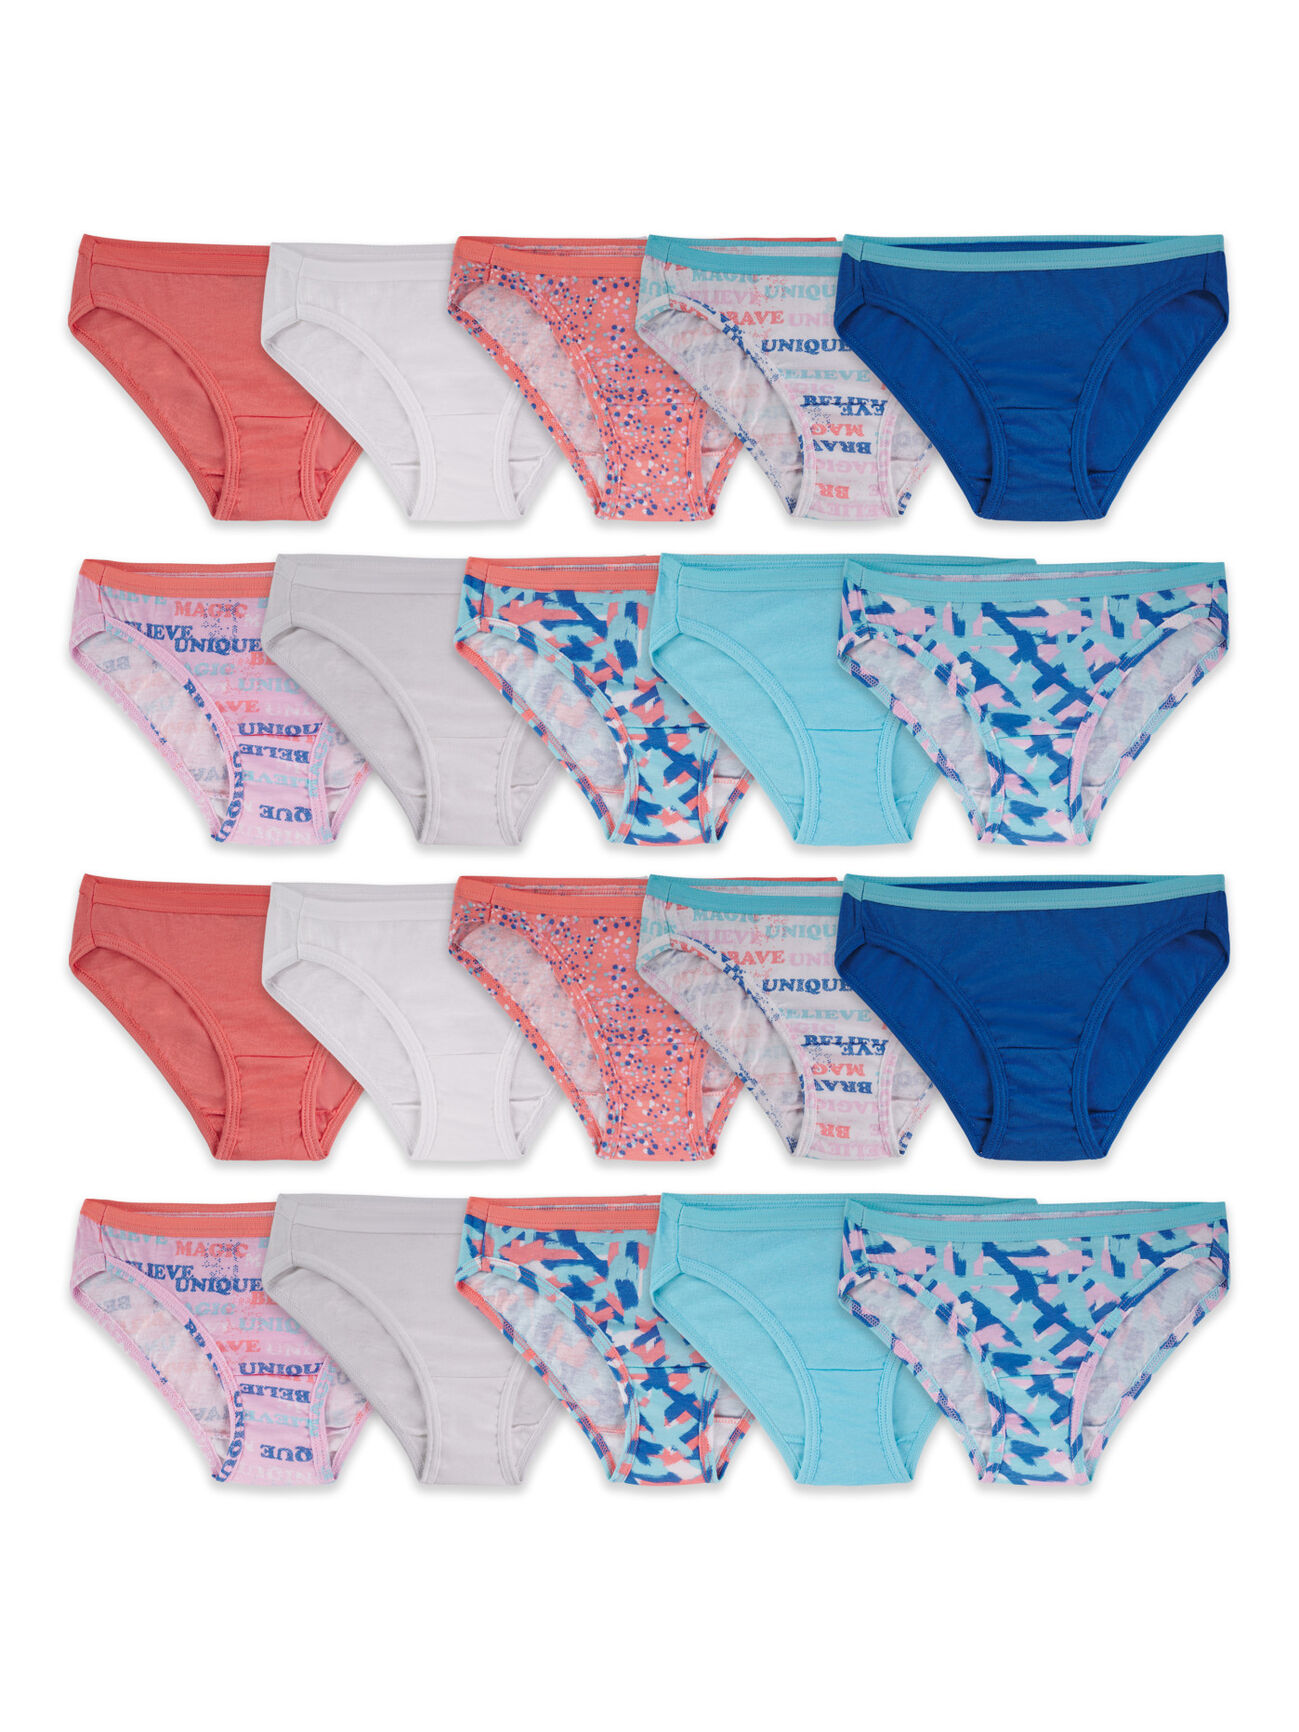 Find more Six Pair Fruit Of The Loom Girls Underwear, Size 8 for